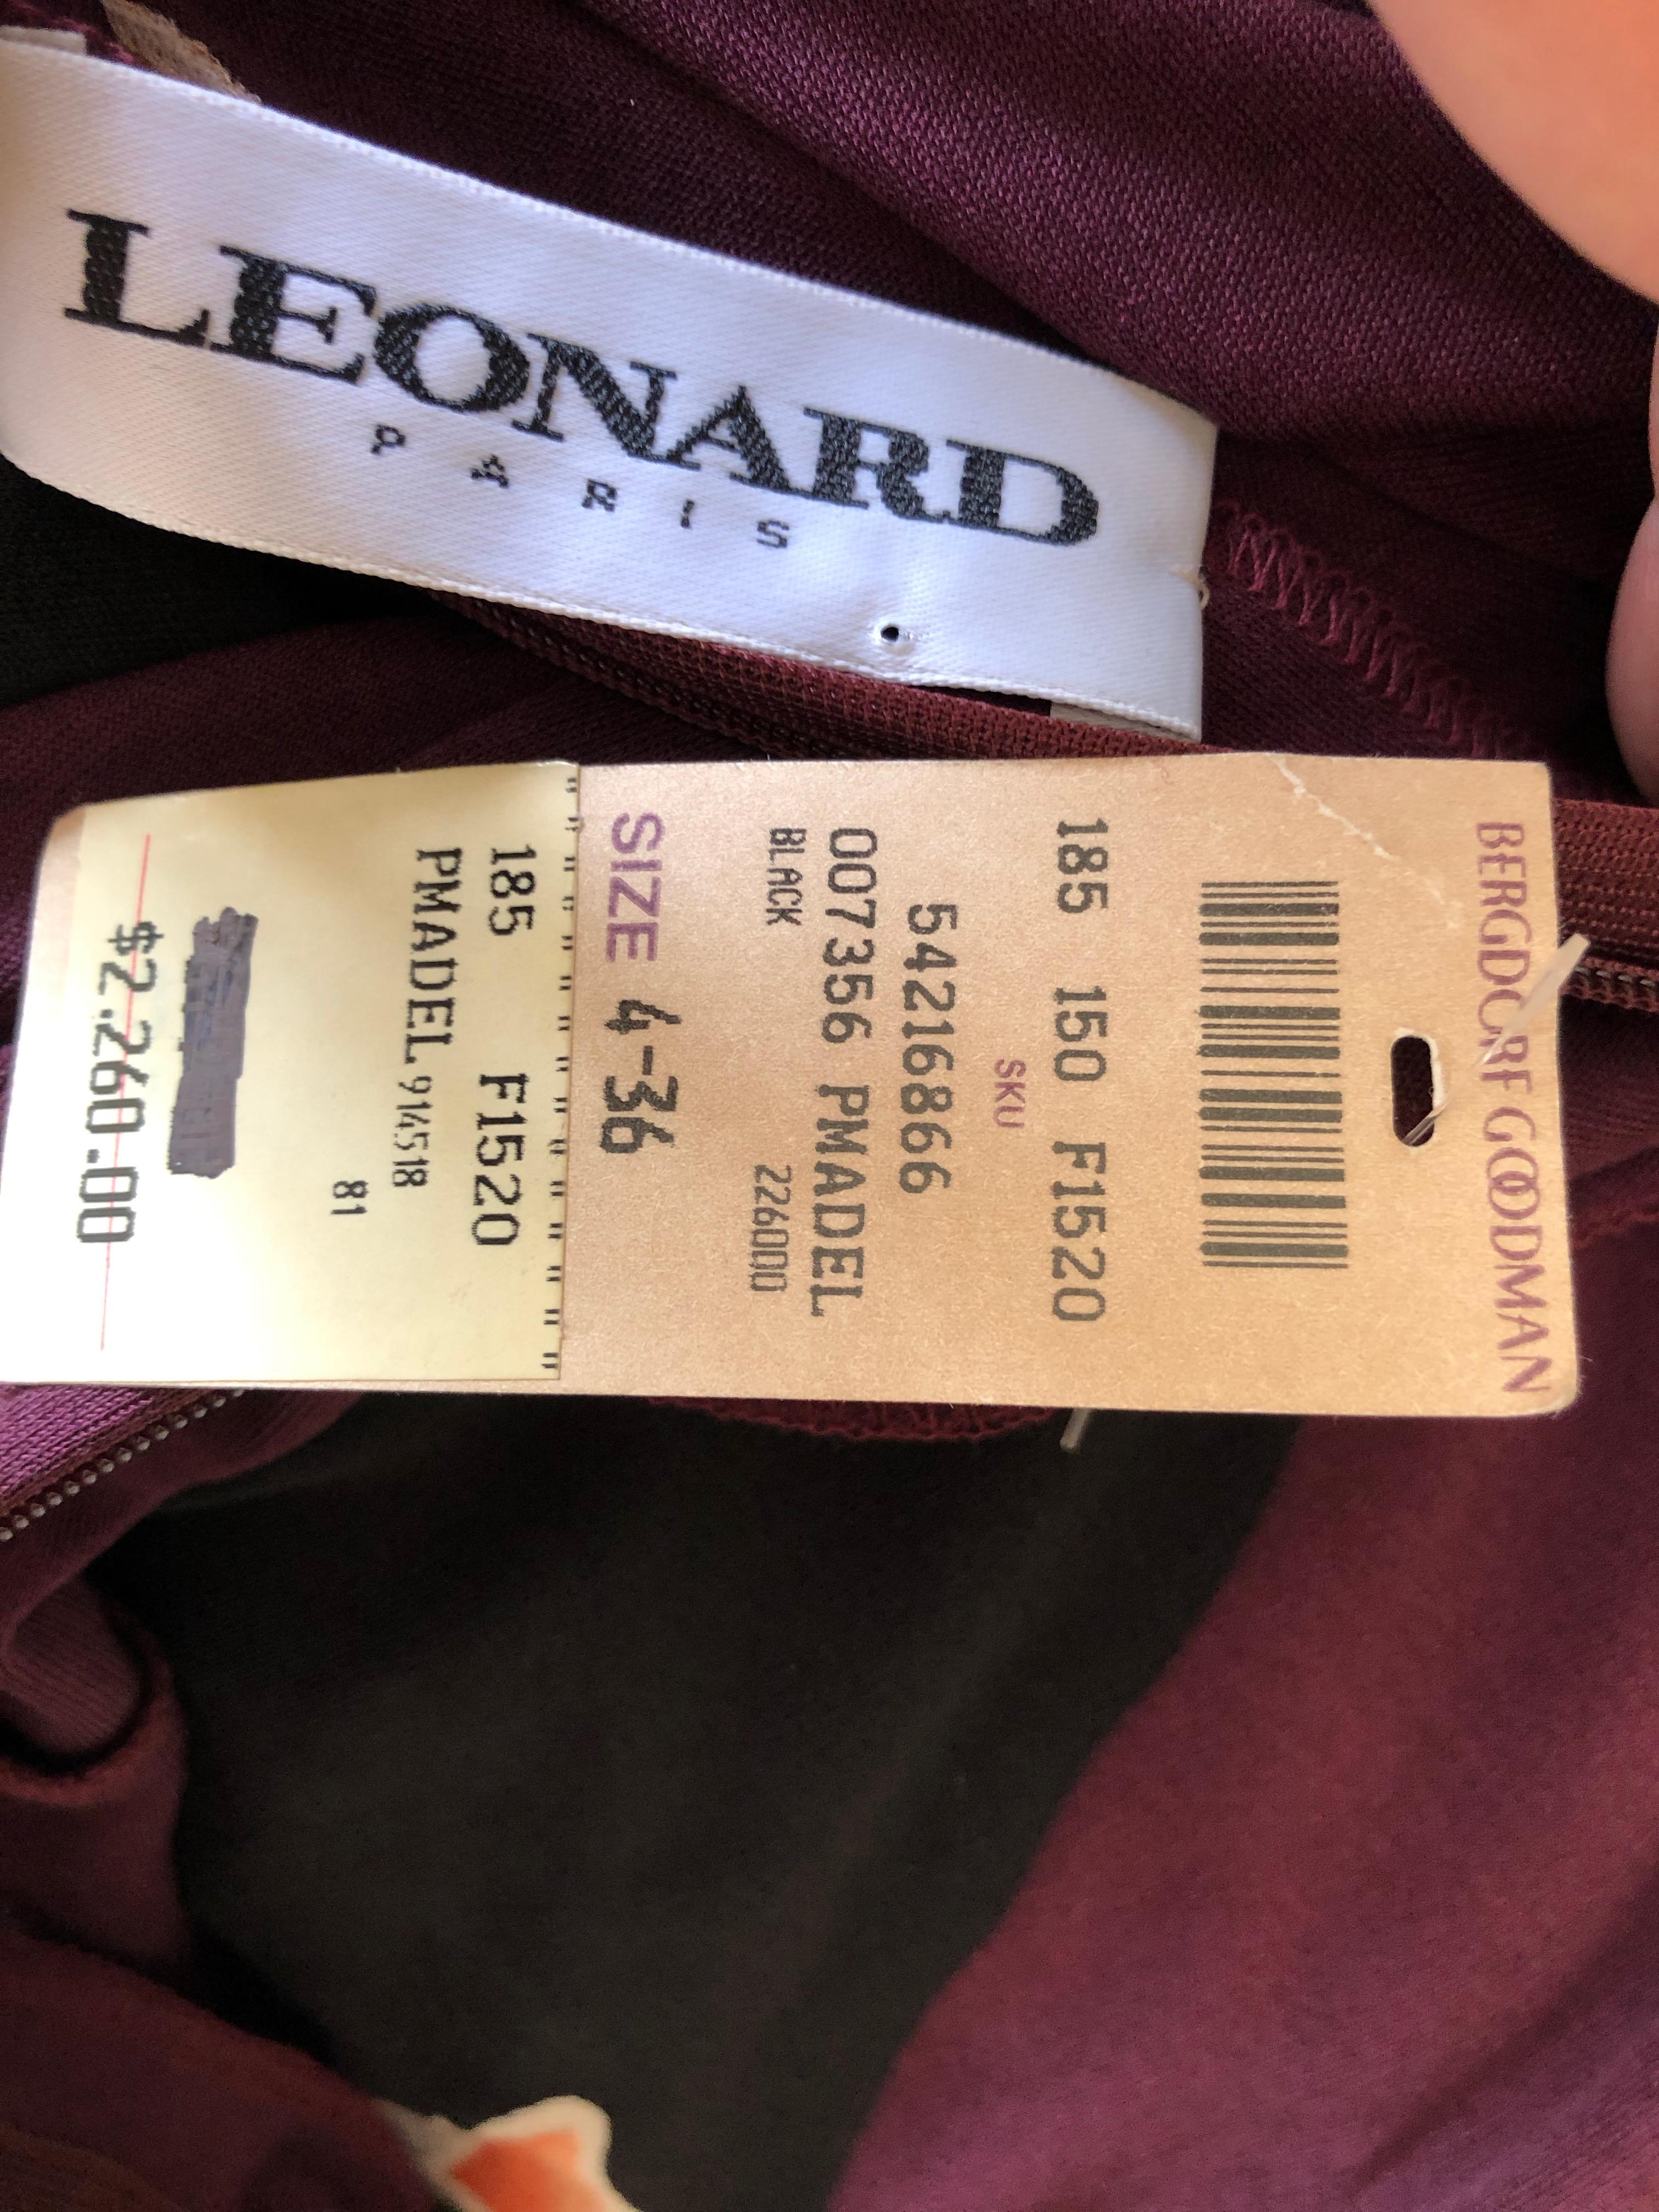 Leonard Paris for Bergdorf Goodman Vintage Silk Jersey Dress New with Tags, Retail $2260
Leonard , Paris was a contemporary of Pucci, using silk jersey printed in their signature florals, Leonard was as expensive, if not more, than Pucci.
Zips up